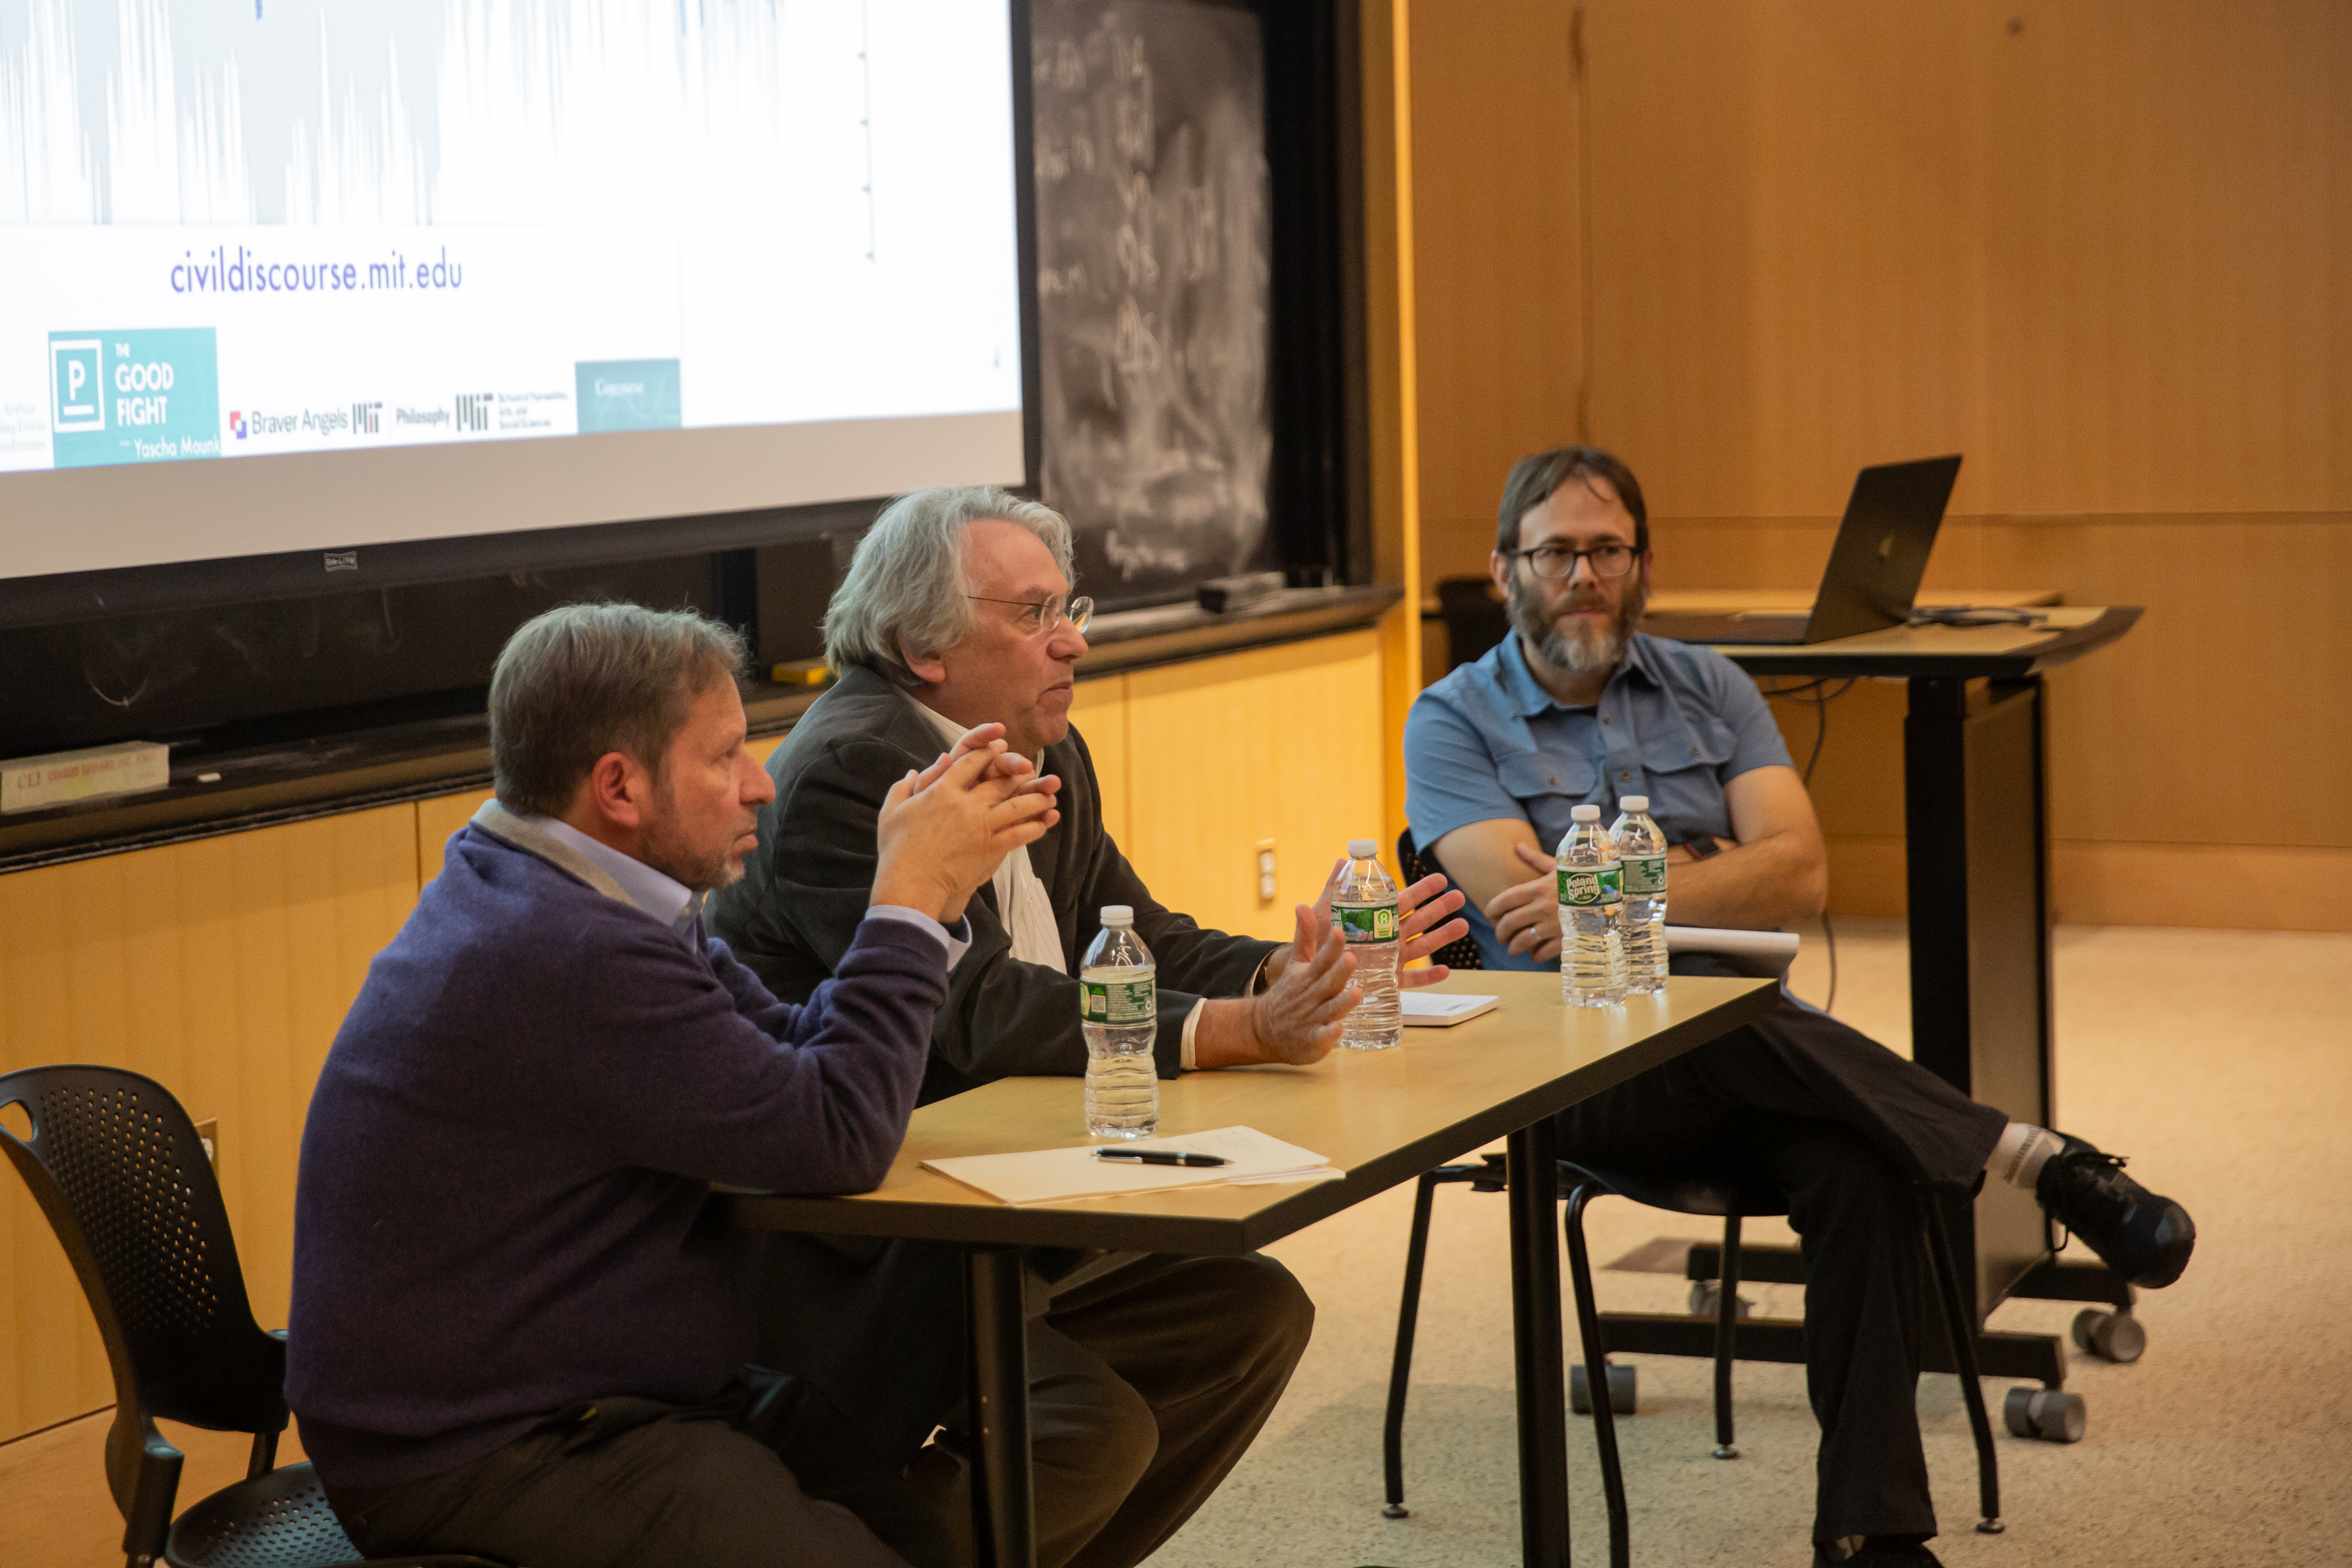 (from left) Steve Koonin, Kerry Emanuel, and moderator Brad Skow discuss climate change with an audience. There's a slide visible on the wall behind them with a web address, civildiscourse.mit.edu, visible. There are bottles of water on the table.